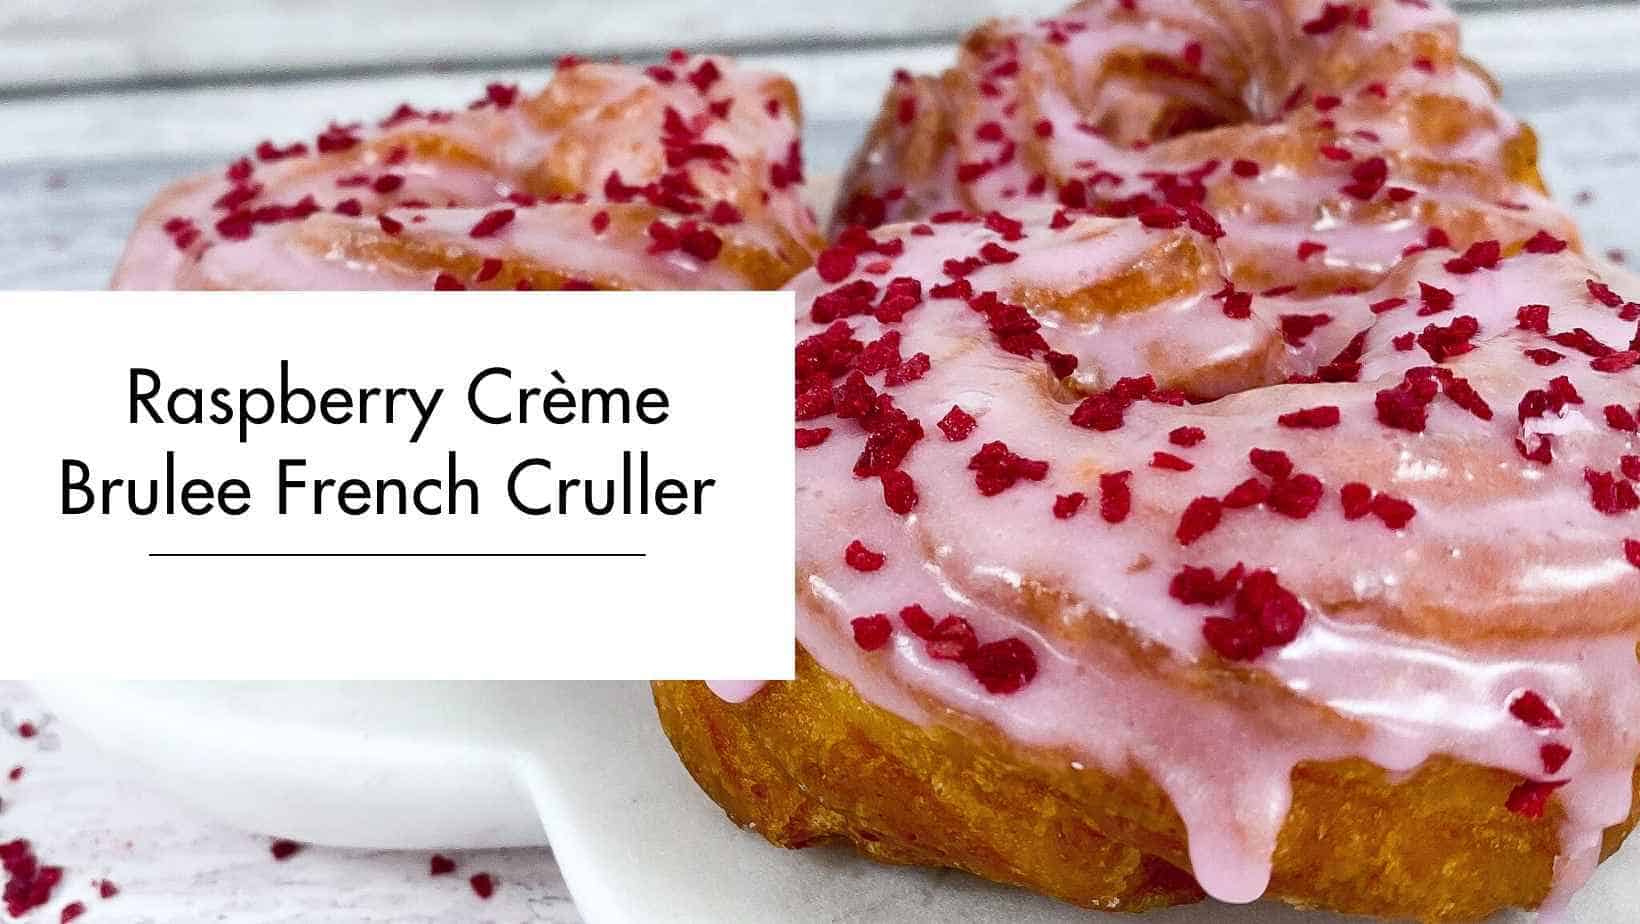 Raspberry Crème Brulee French Cruller